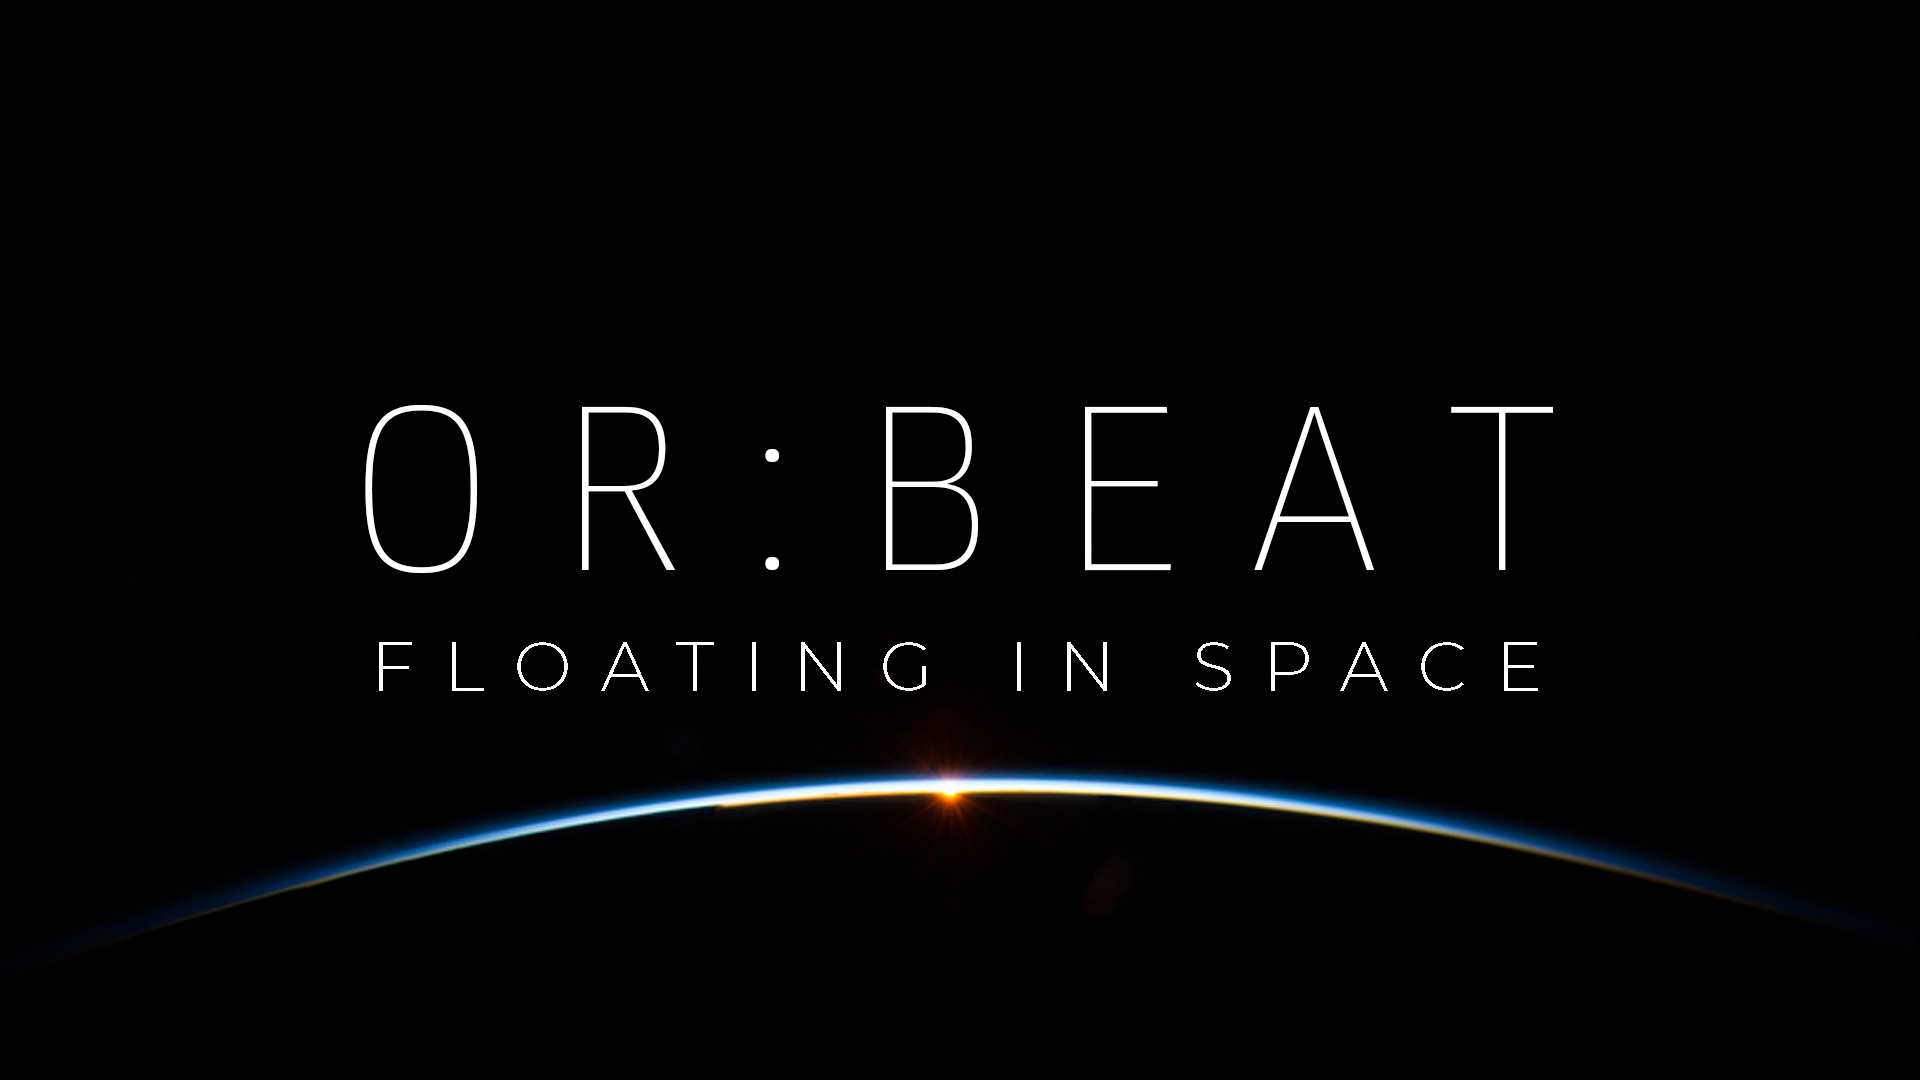 OR:BEAT floating in space